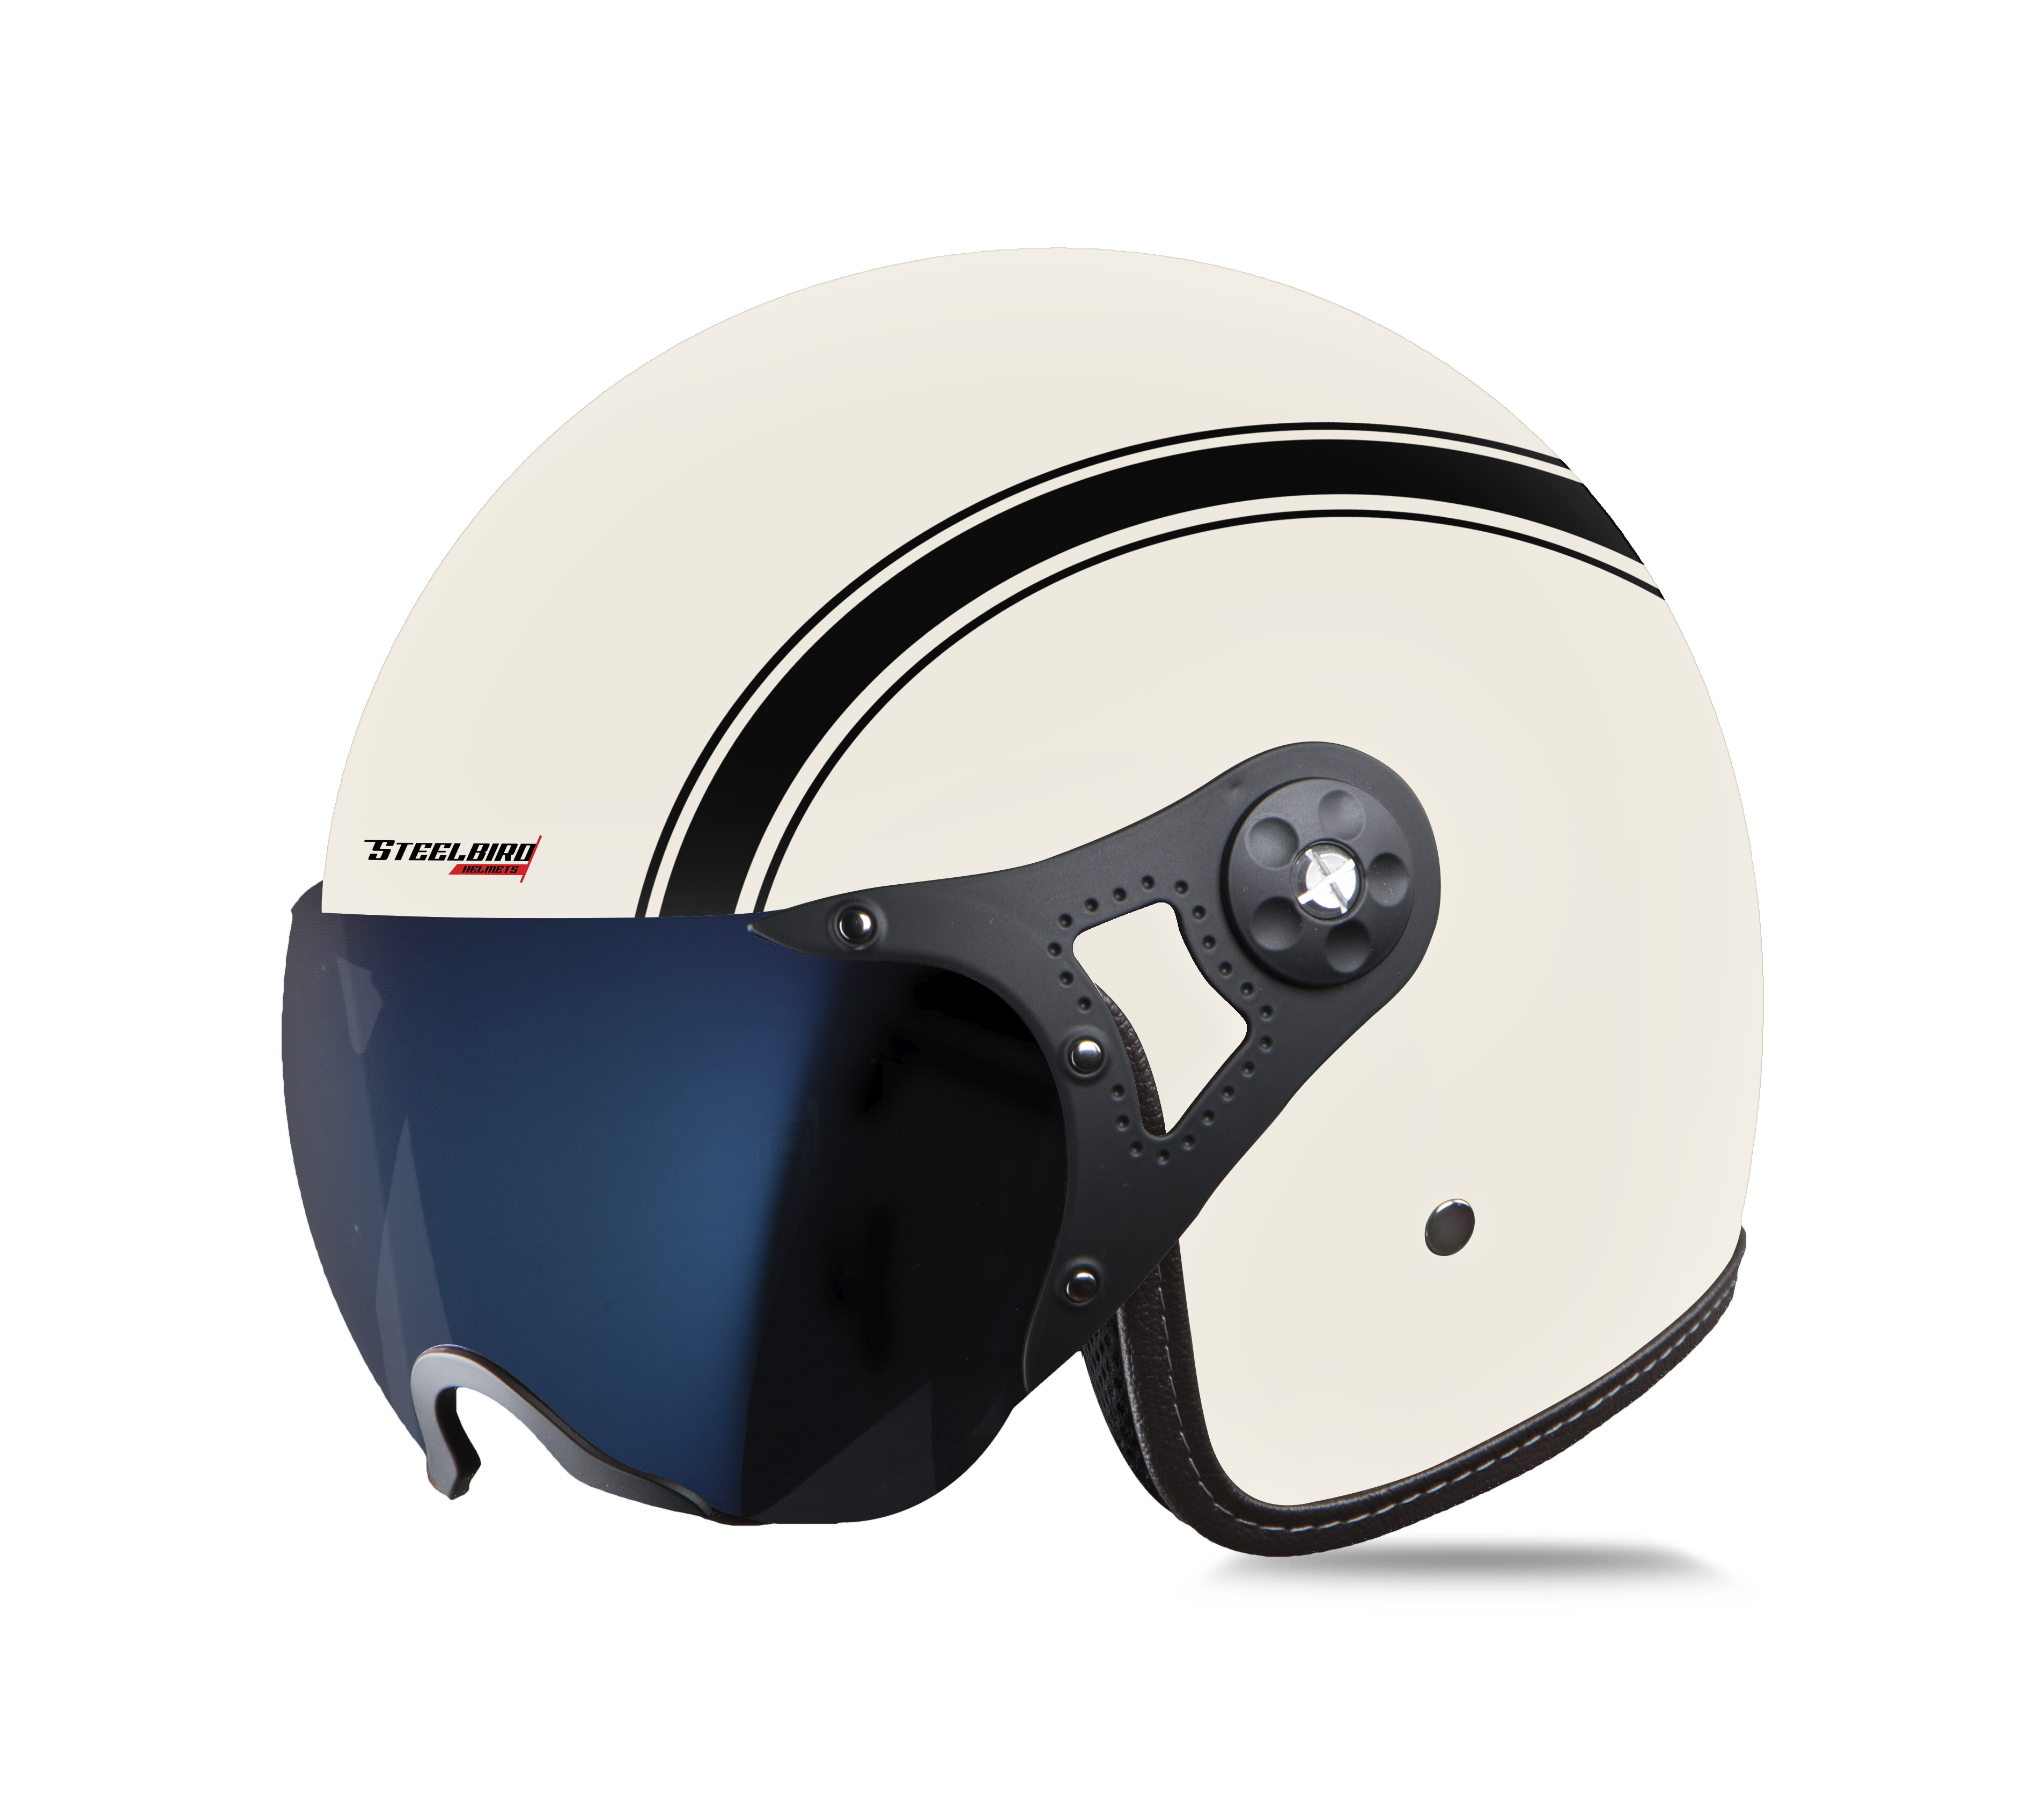 SB-40 DOT STRIPE MAT OFF-WHITE WITH BLACK (WITH EXTRA CLEAR VISOR)